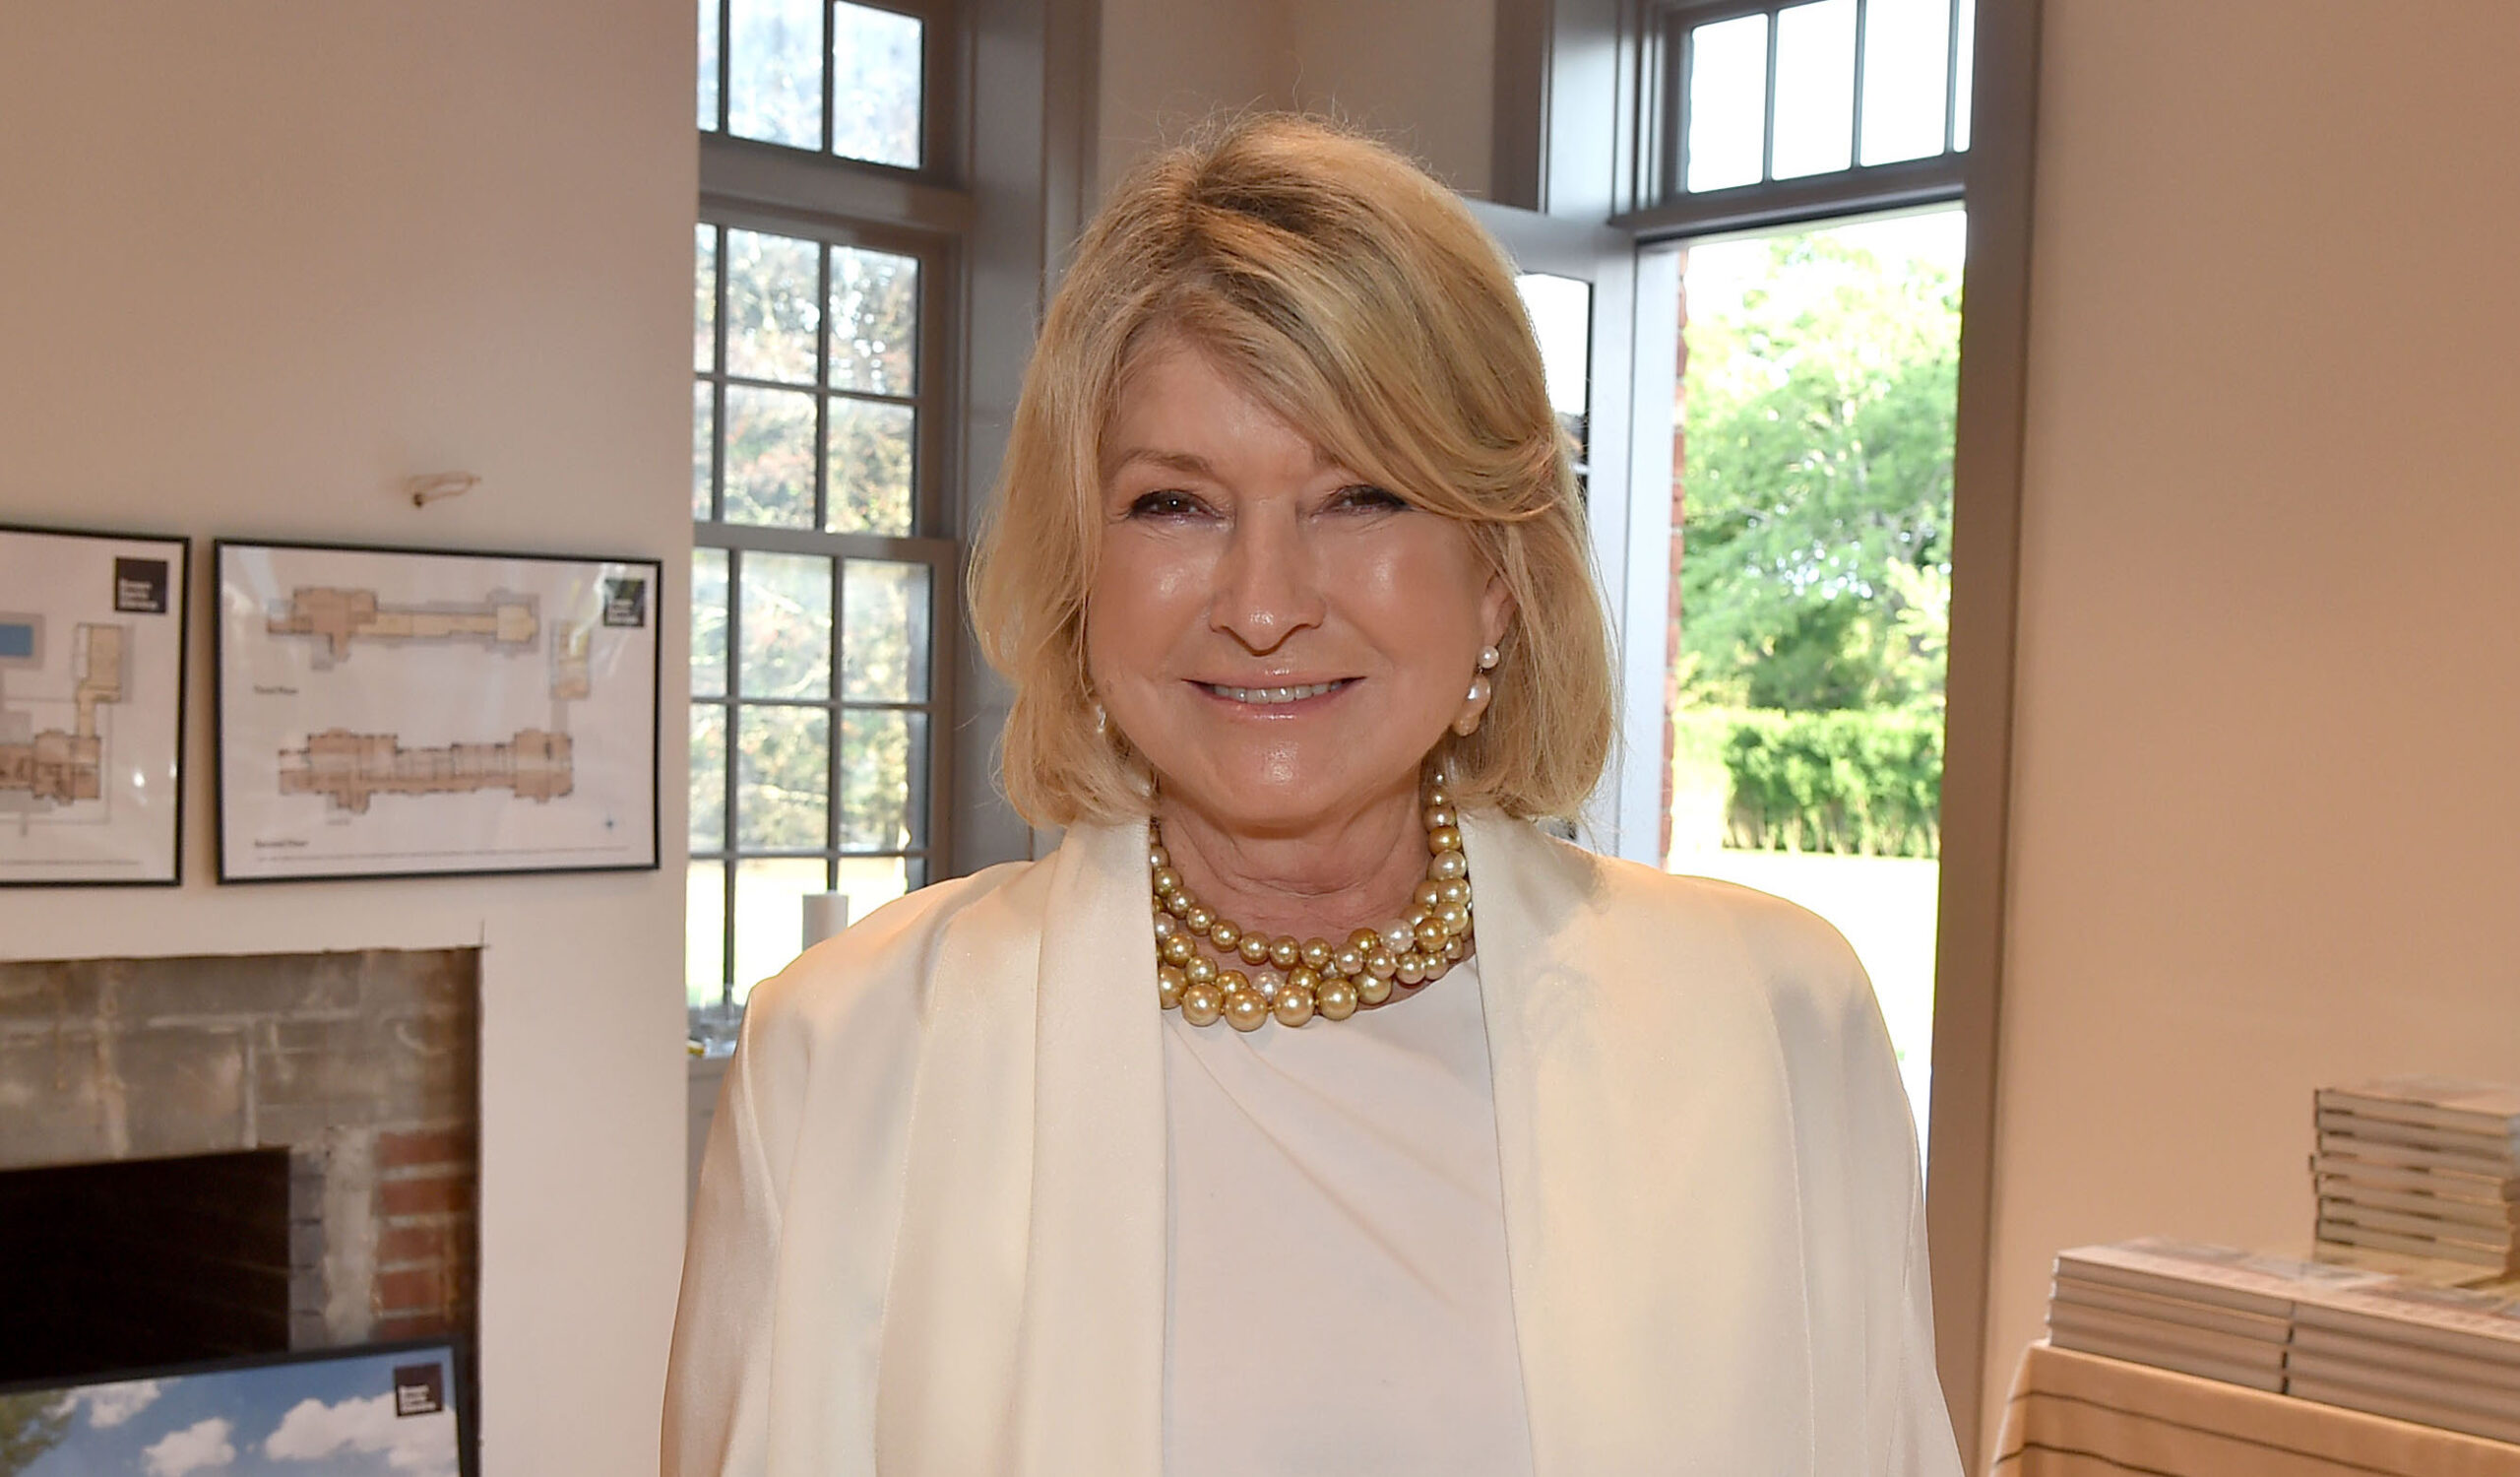 Martha Stewart denies plastic surgery rumors after Sports Illustrated cover.